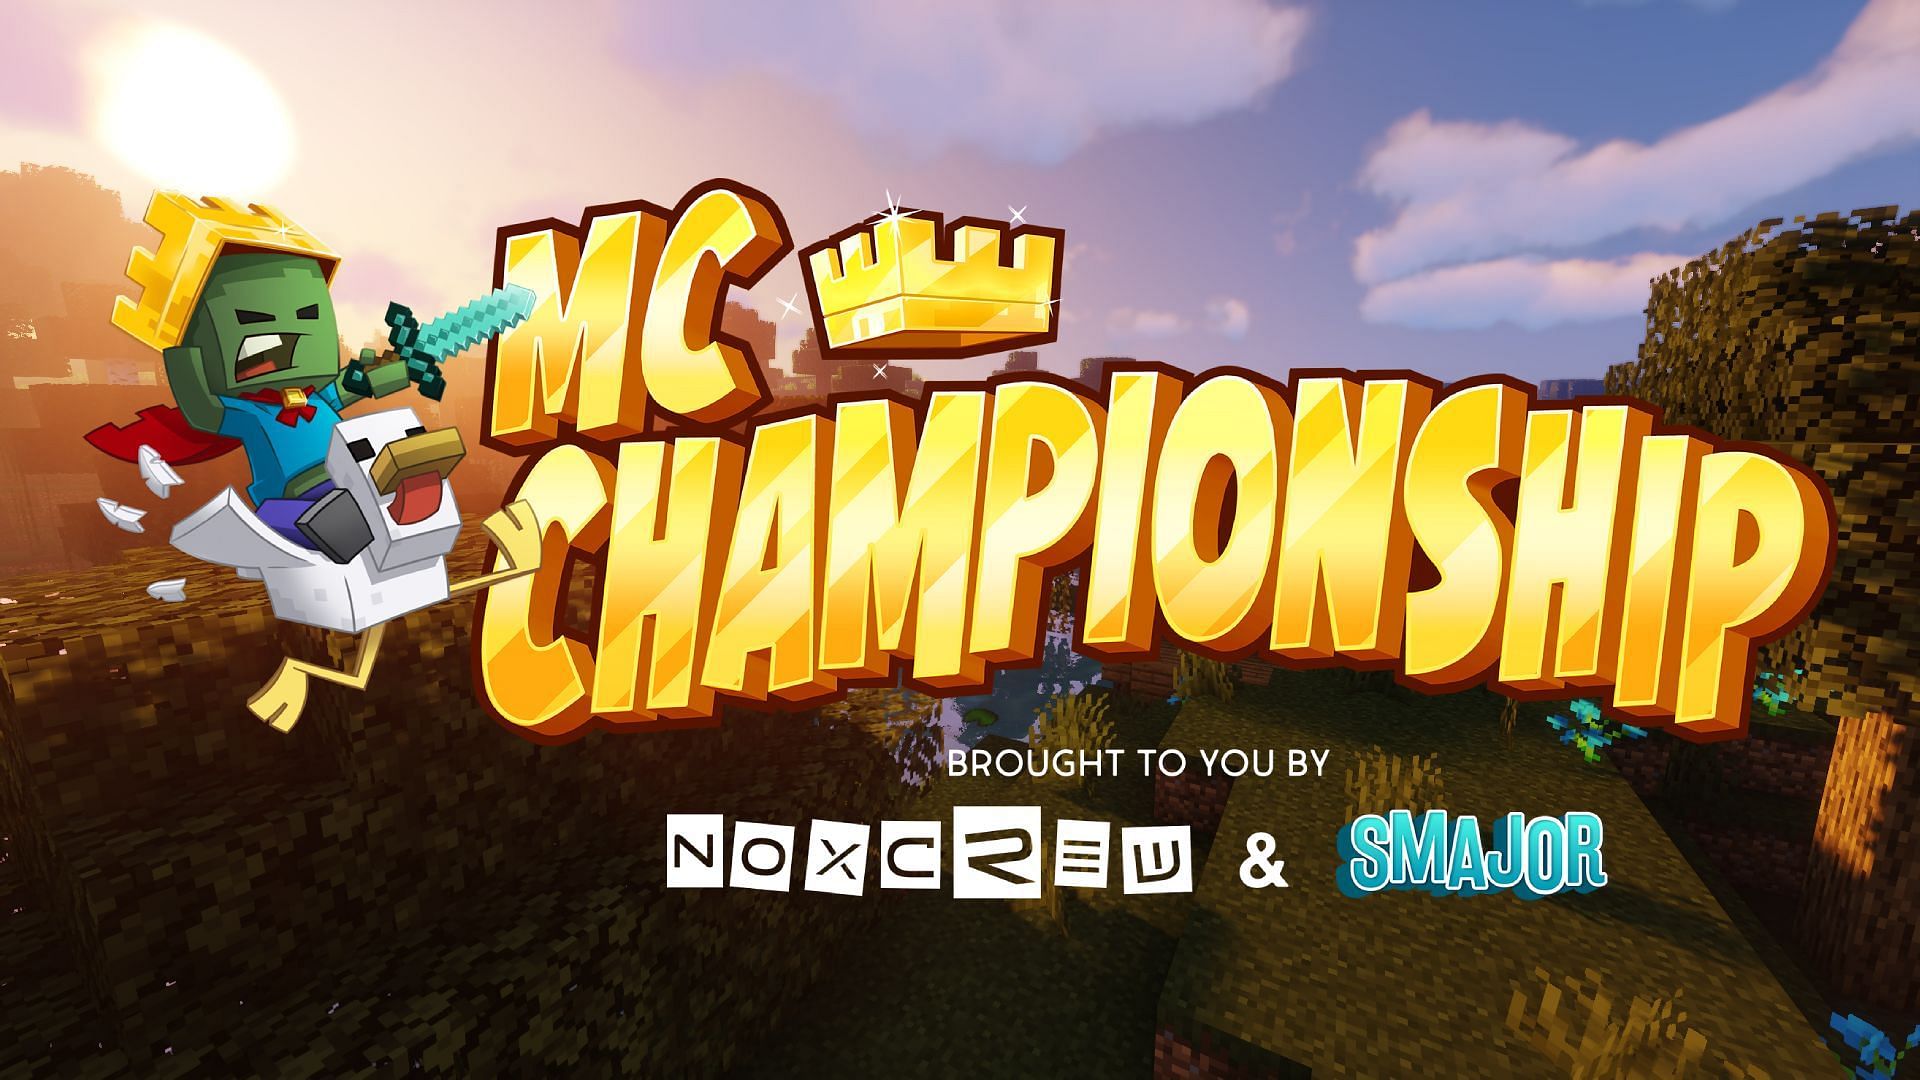 The MCC championship brings the best content creators together (Image via MCC)